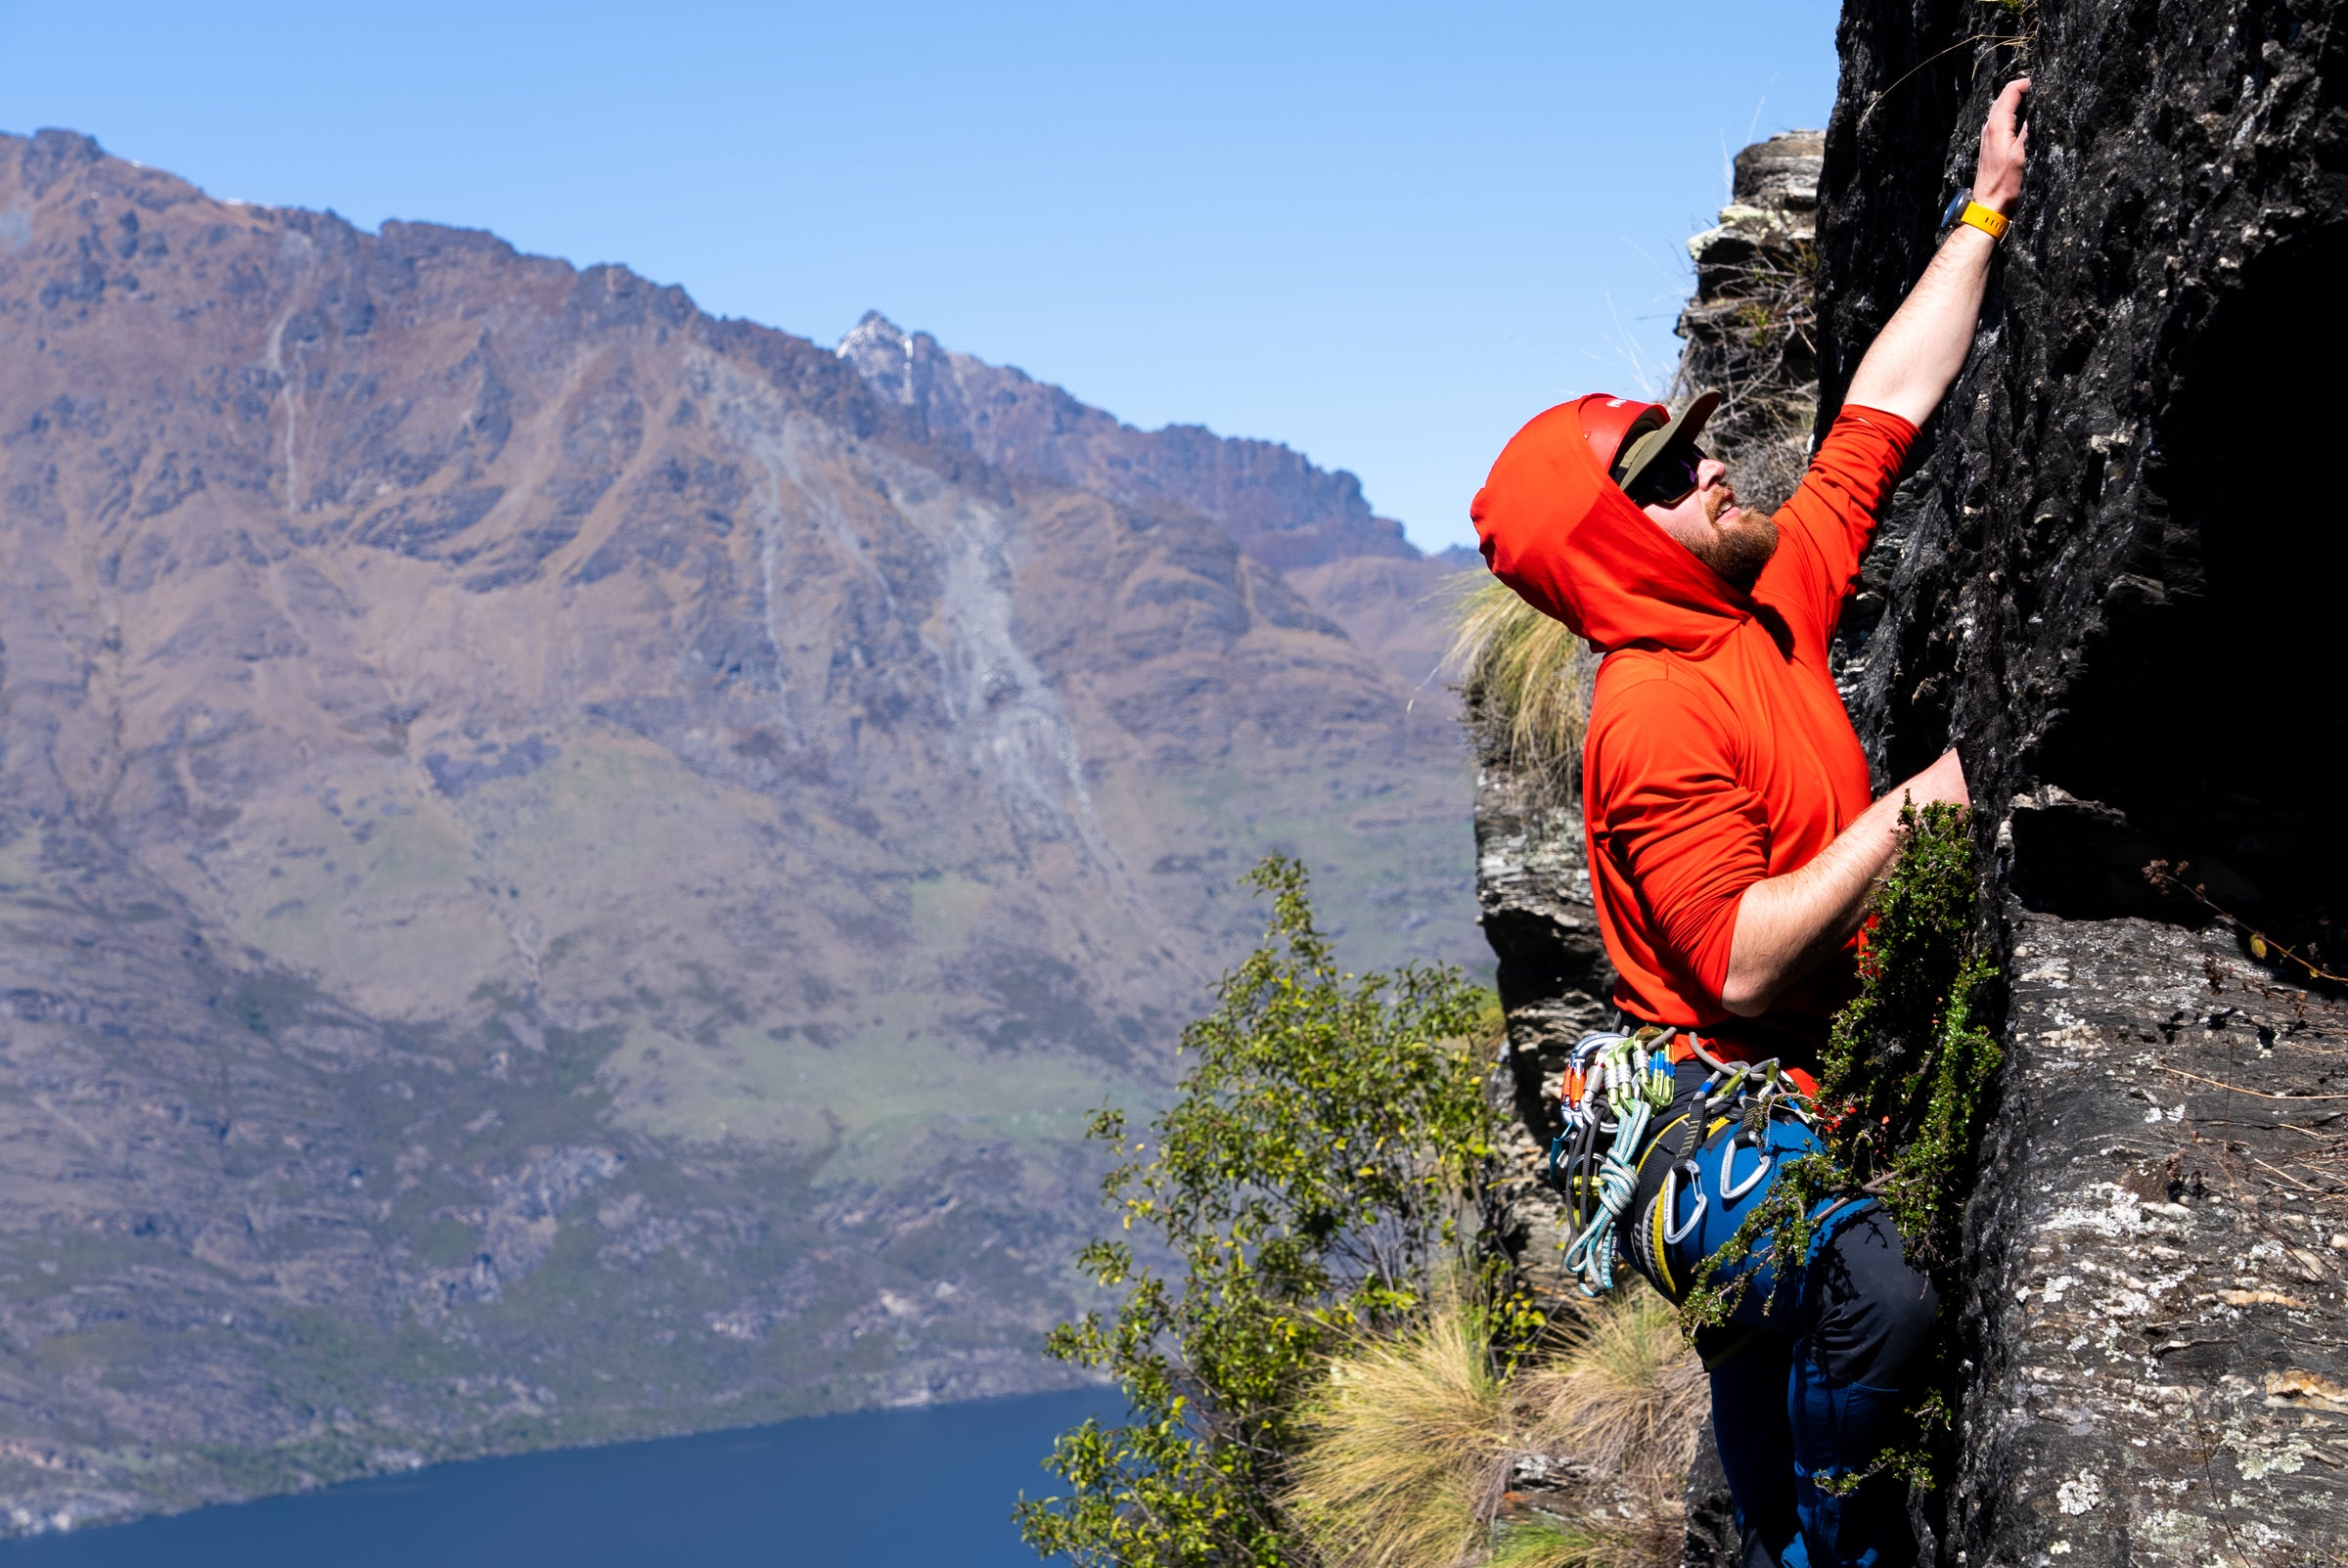 Our instructor showing students the ropes while rock climbing in Queenstown